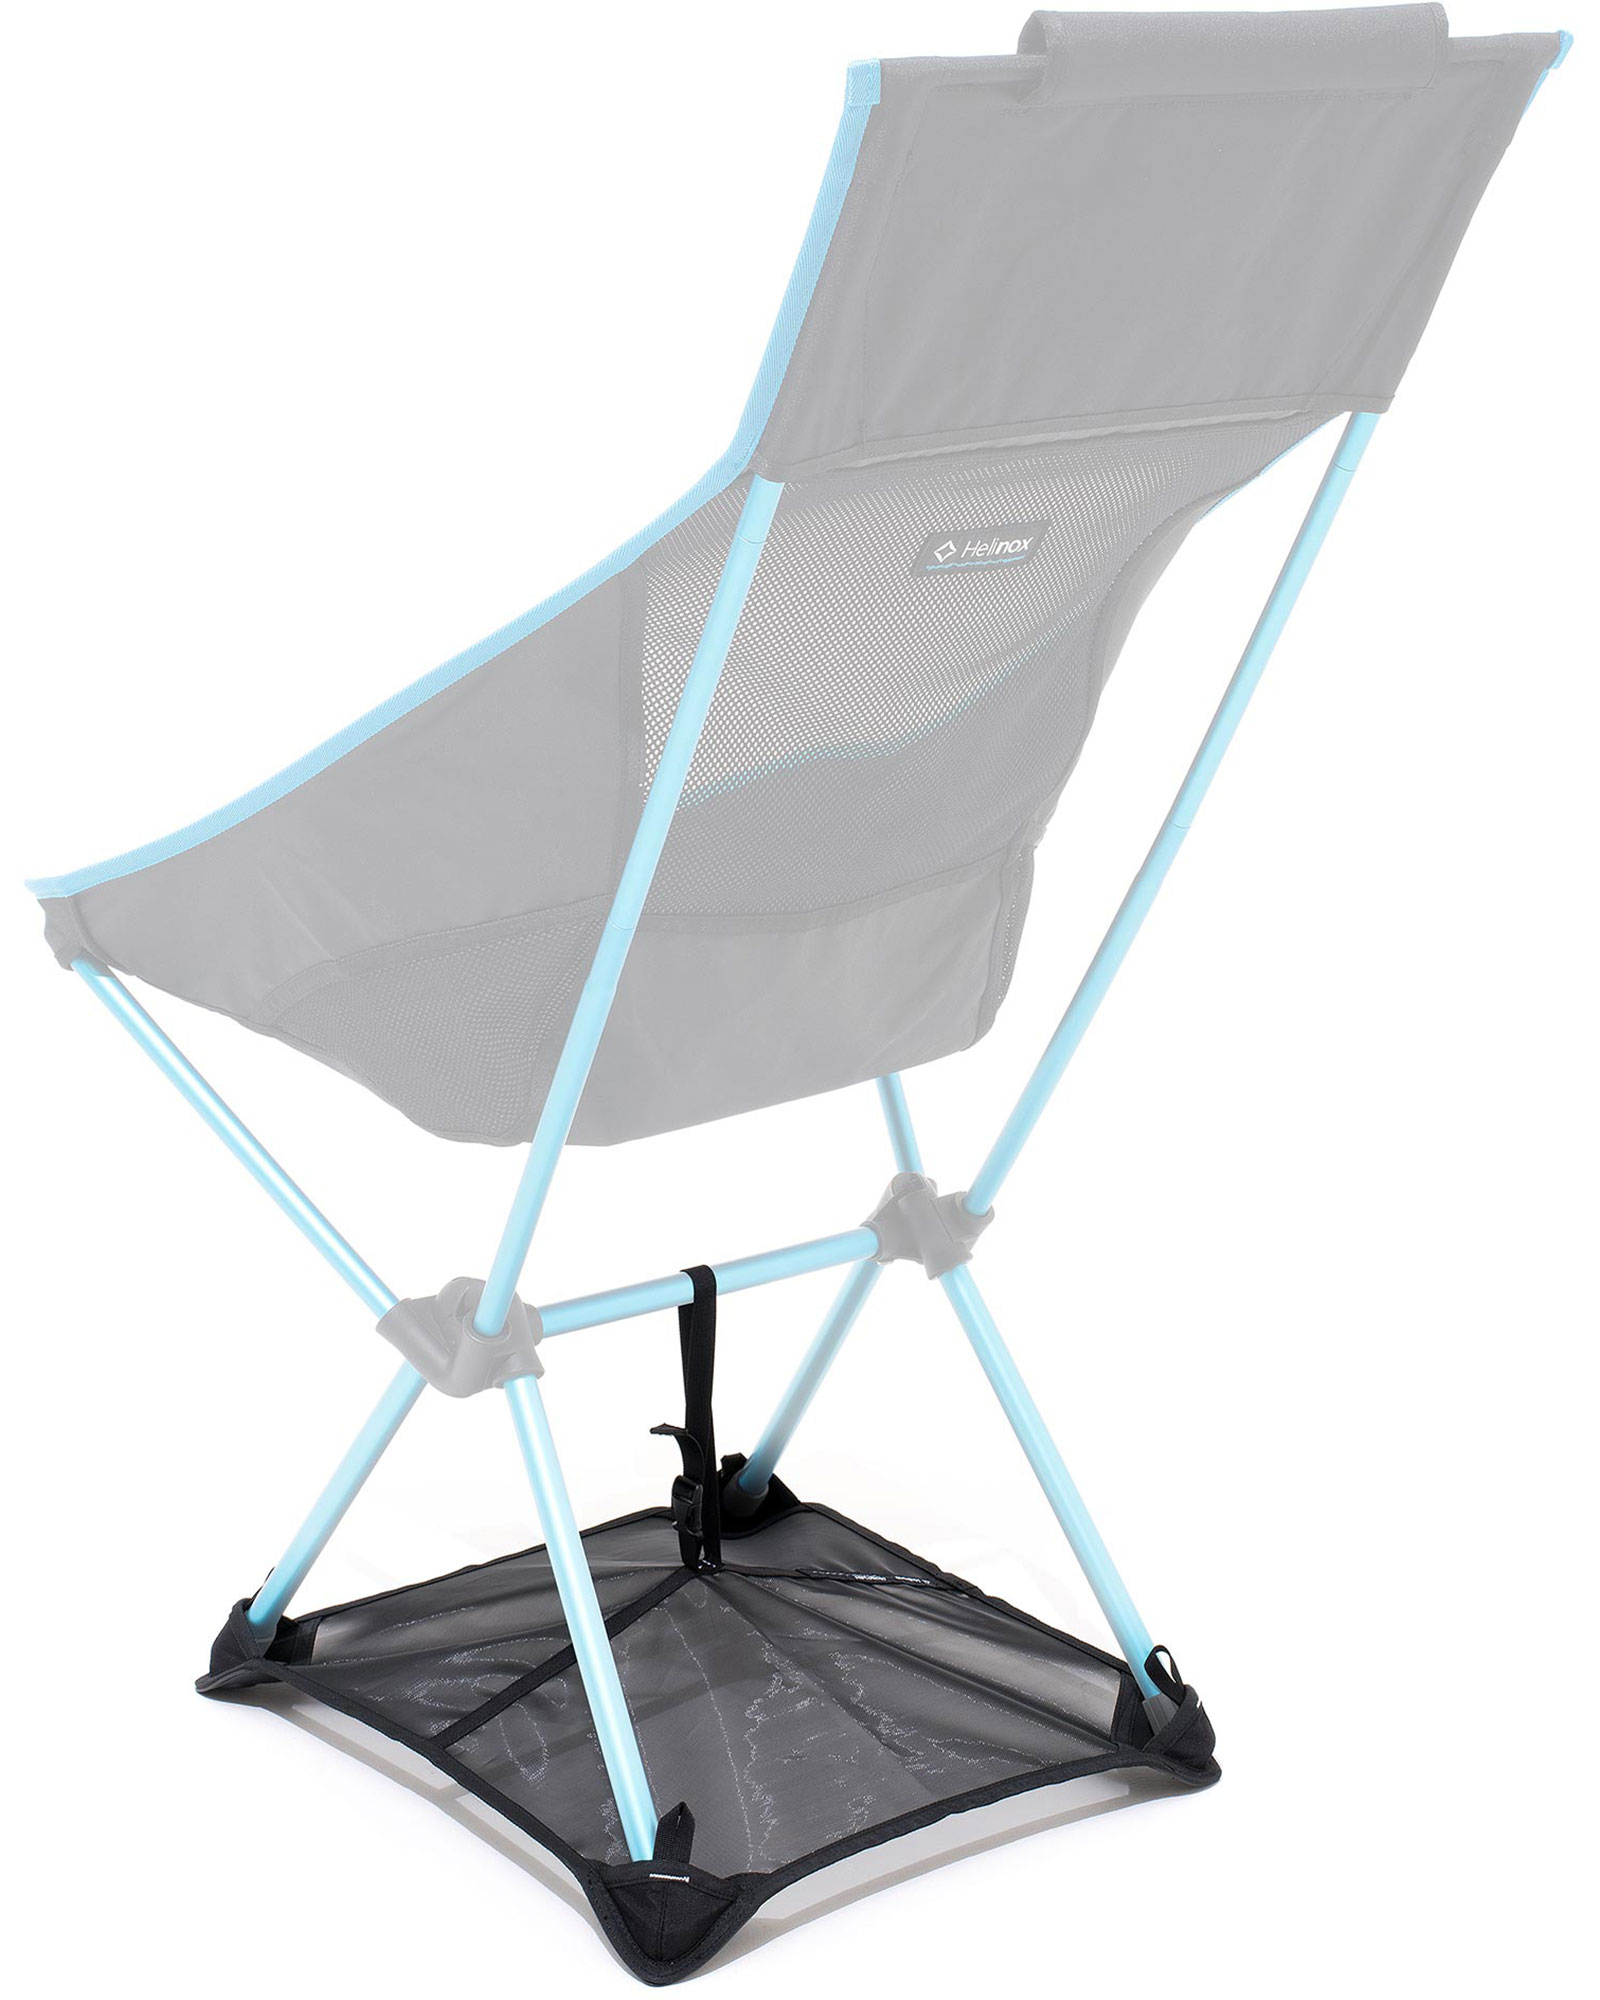 Product image of Helinox Ground Sheet for Sunset Chair